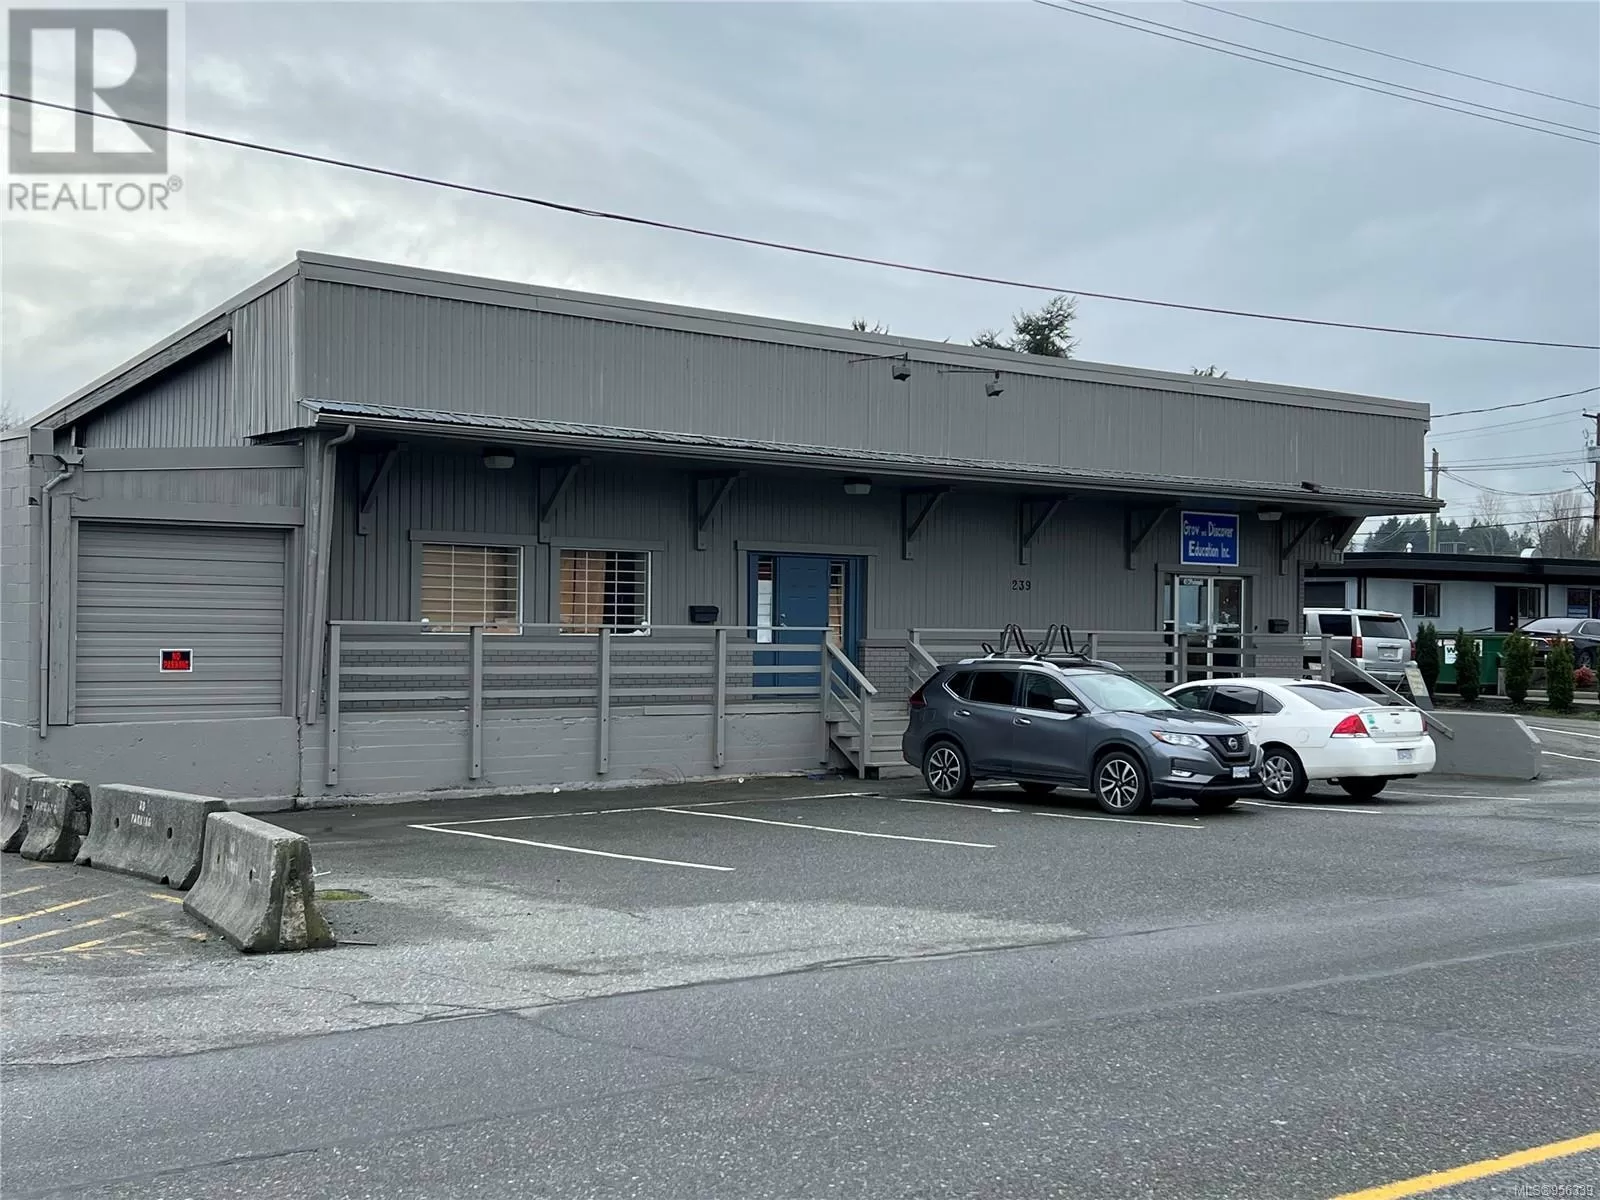 Retail for rent: 239 Puntledge Rd, Courtenay, British Columbia V9N 3P9